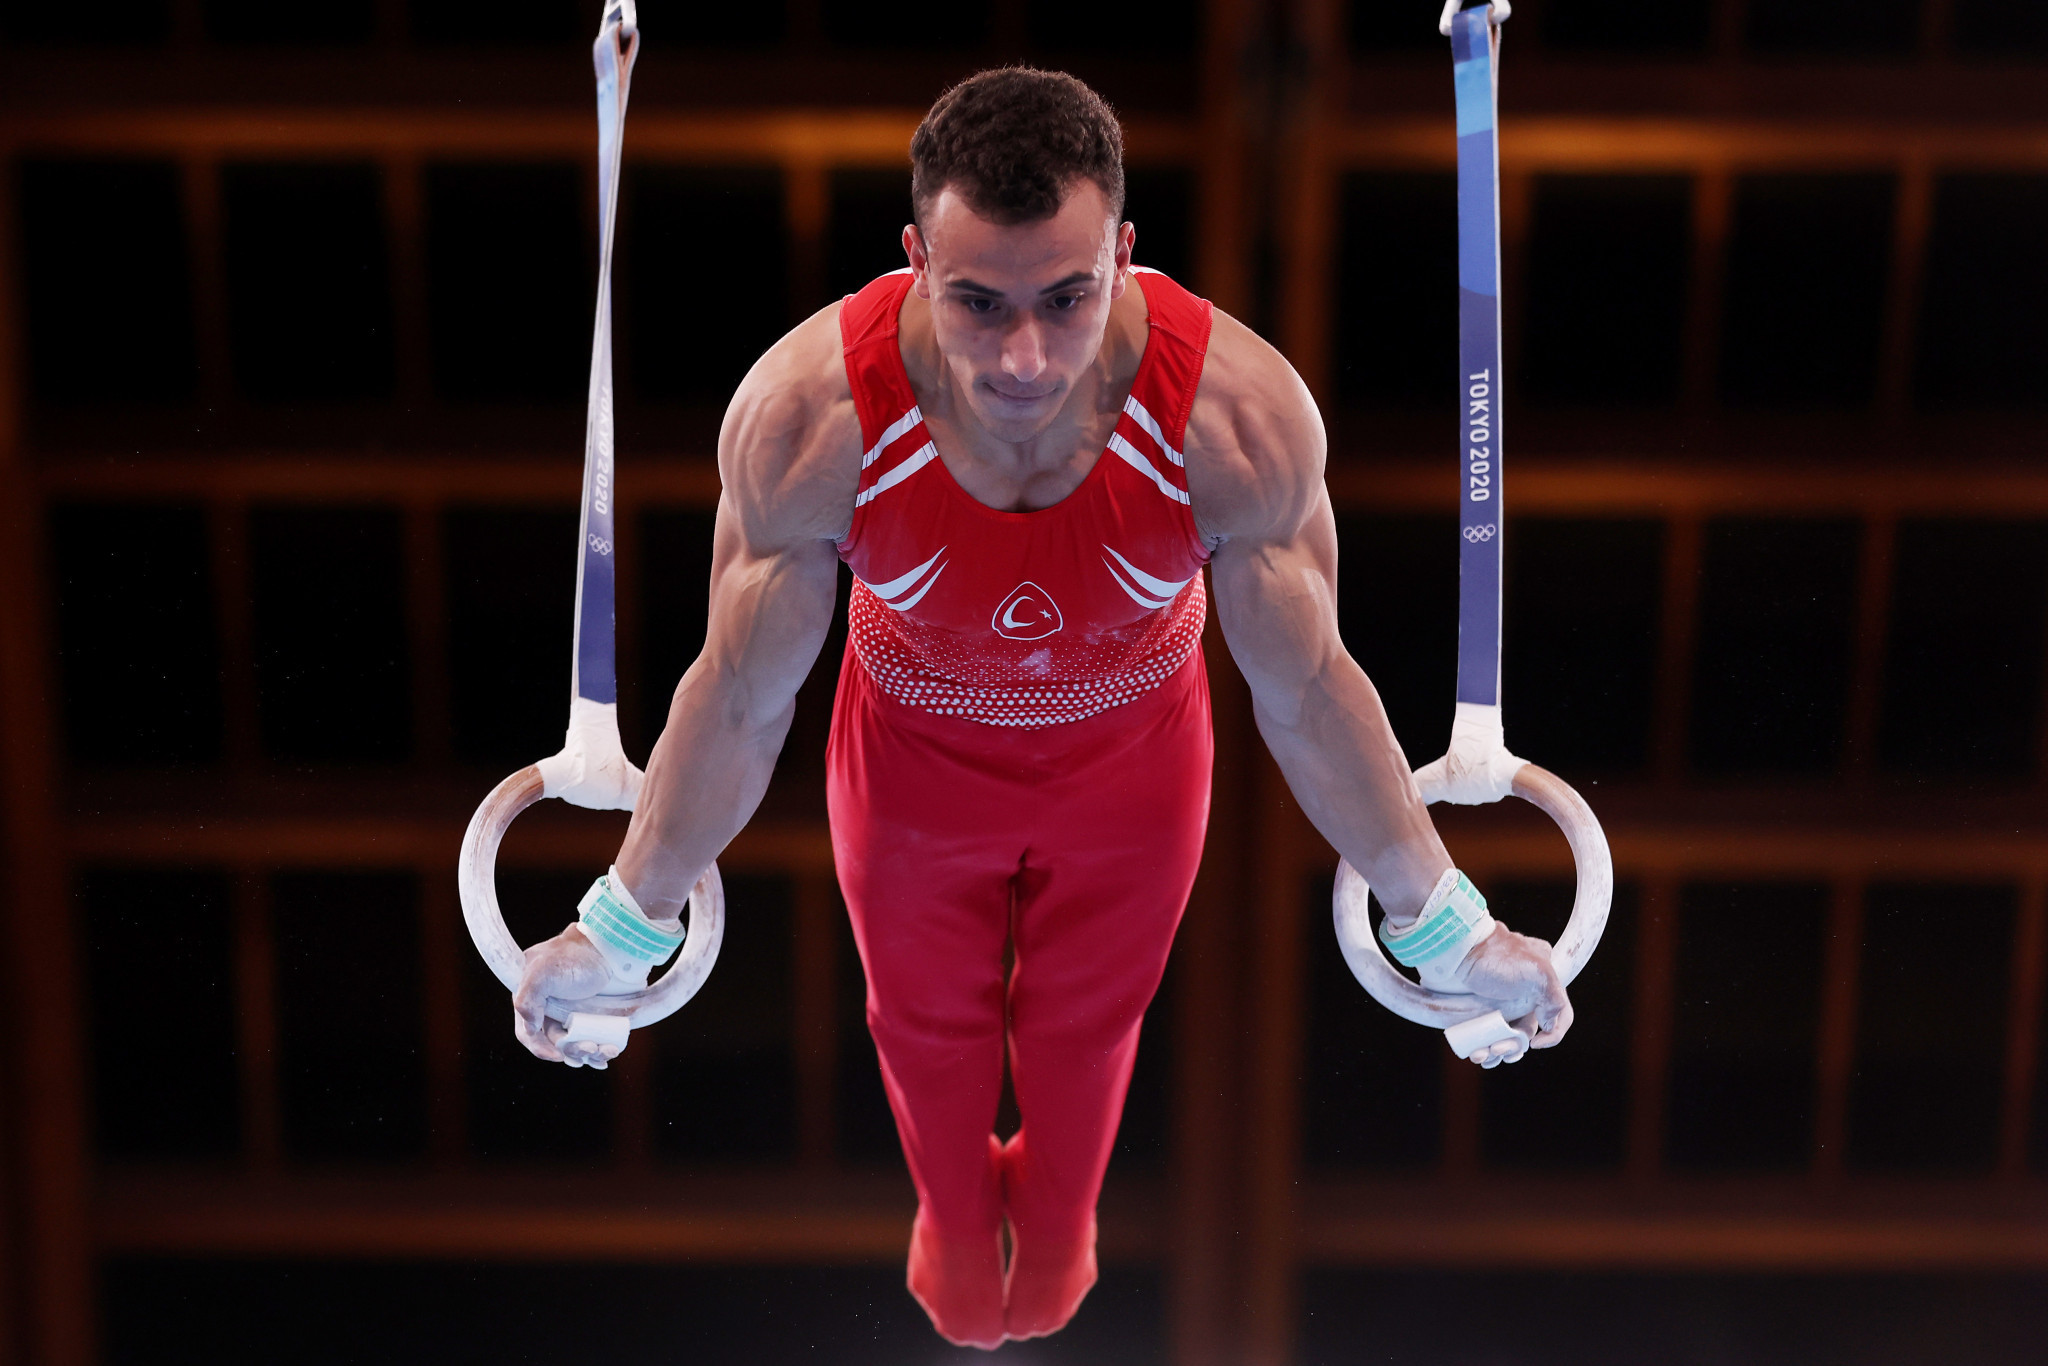 İbrahim Çolak scored the highest in the still rings ©Getty Images